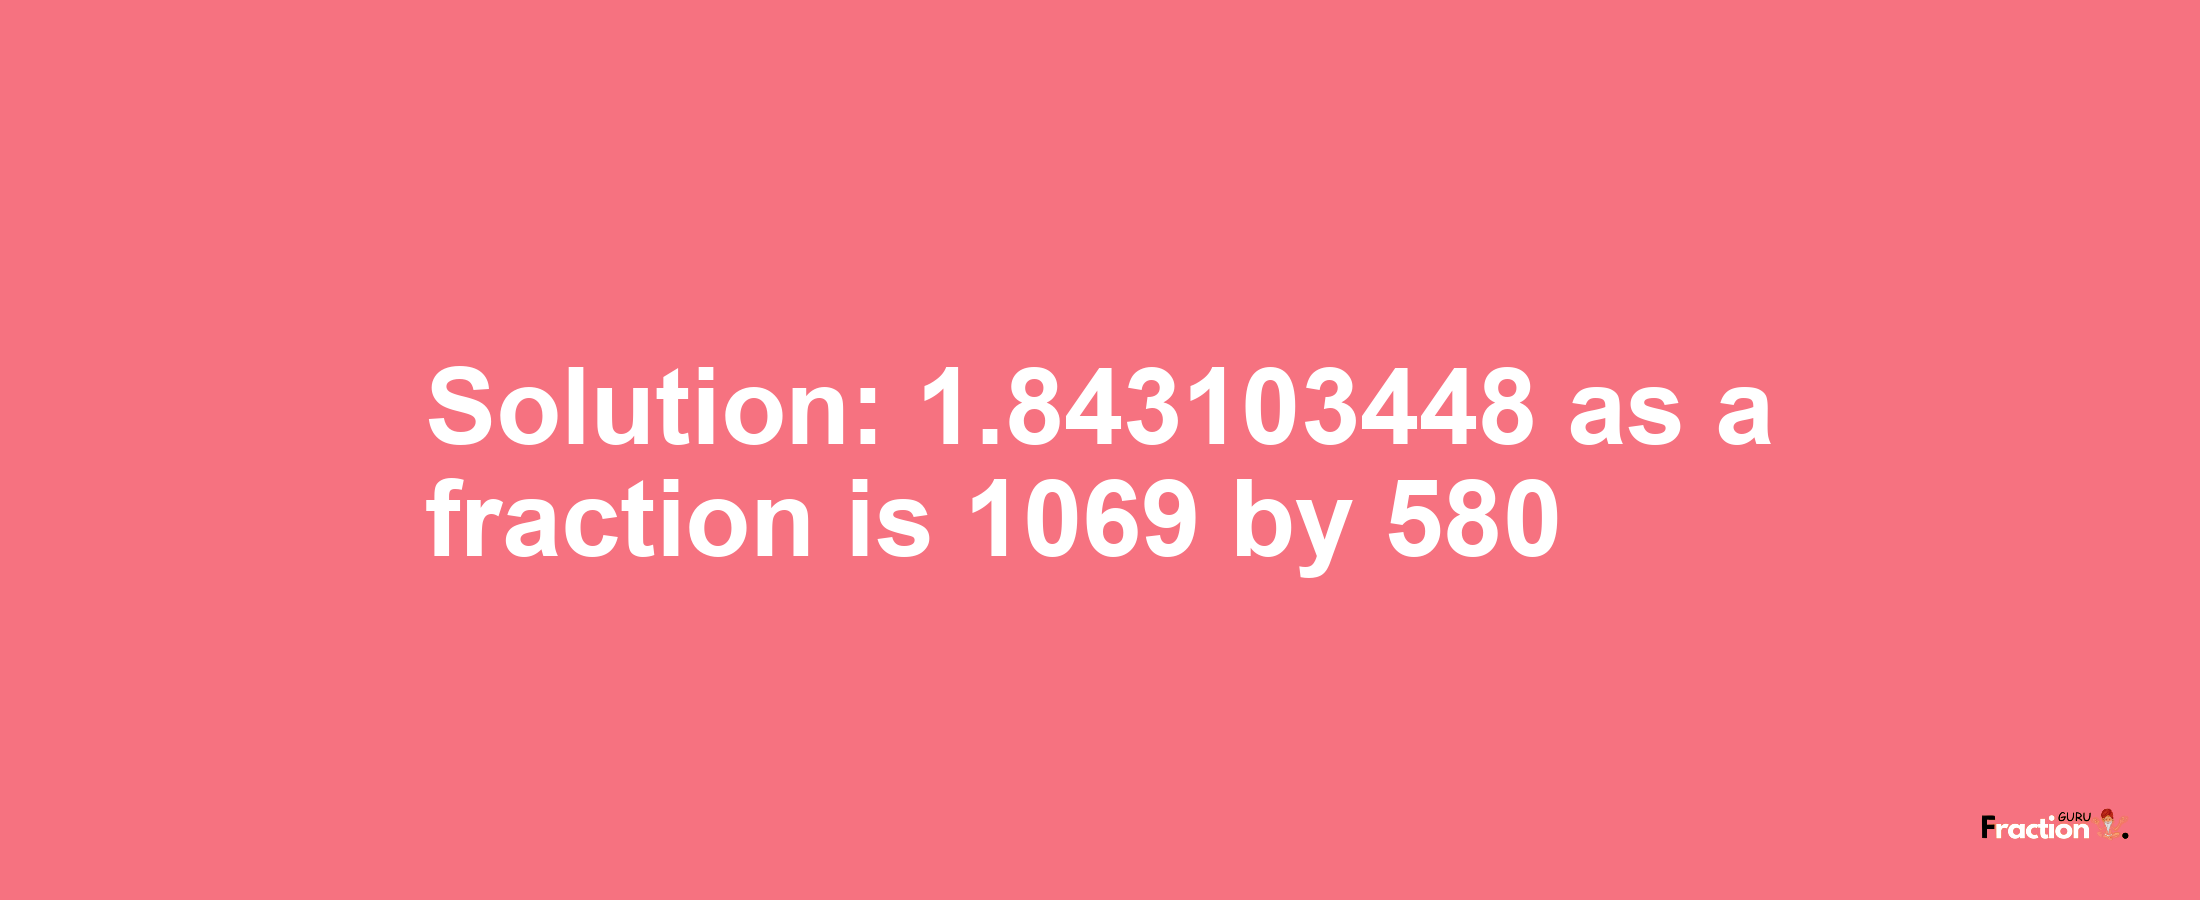 Solution:1.843103448 as a fraction is 1069/580